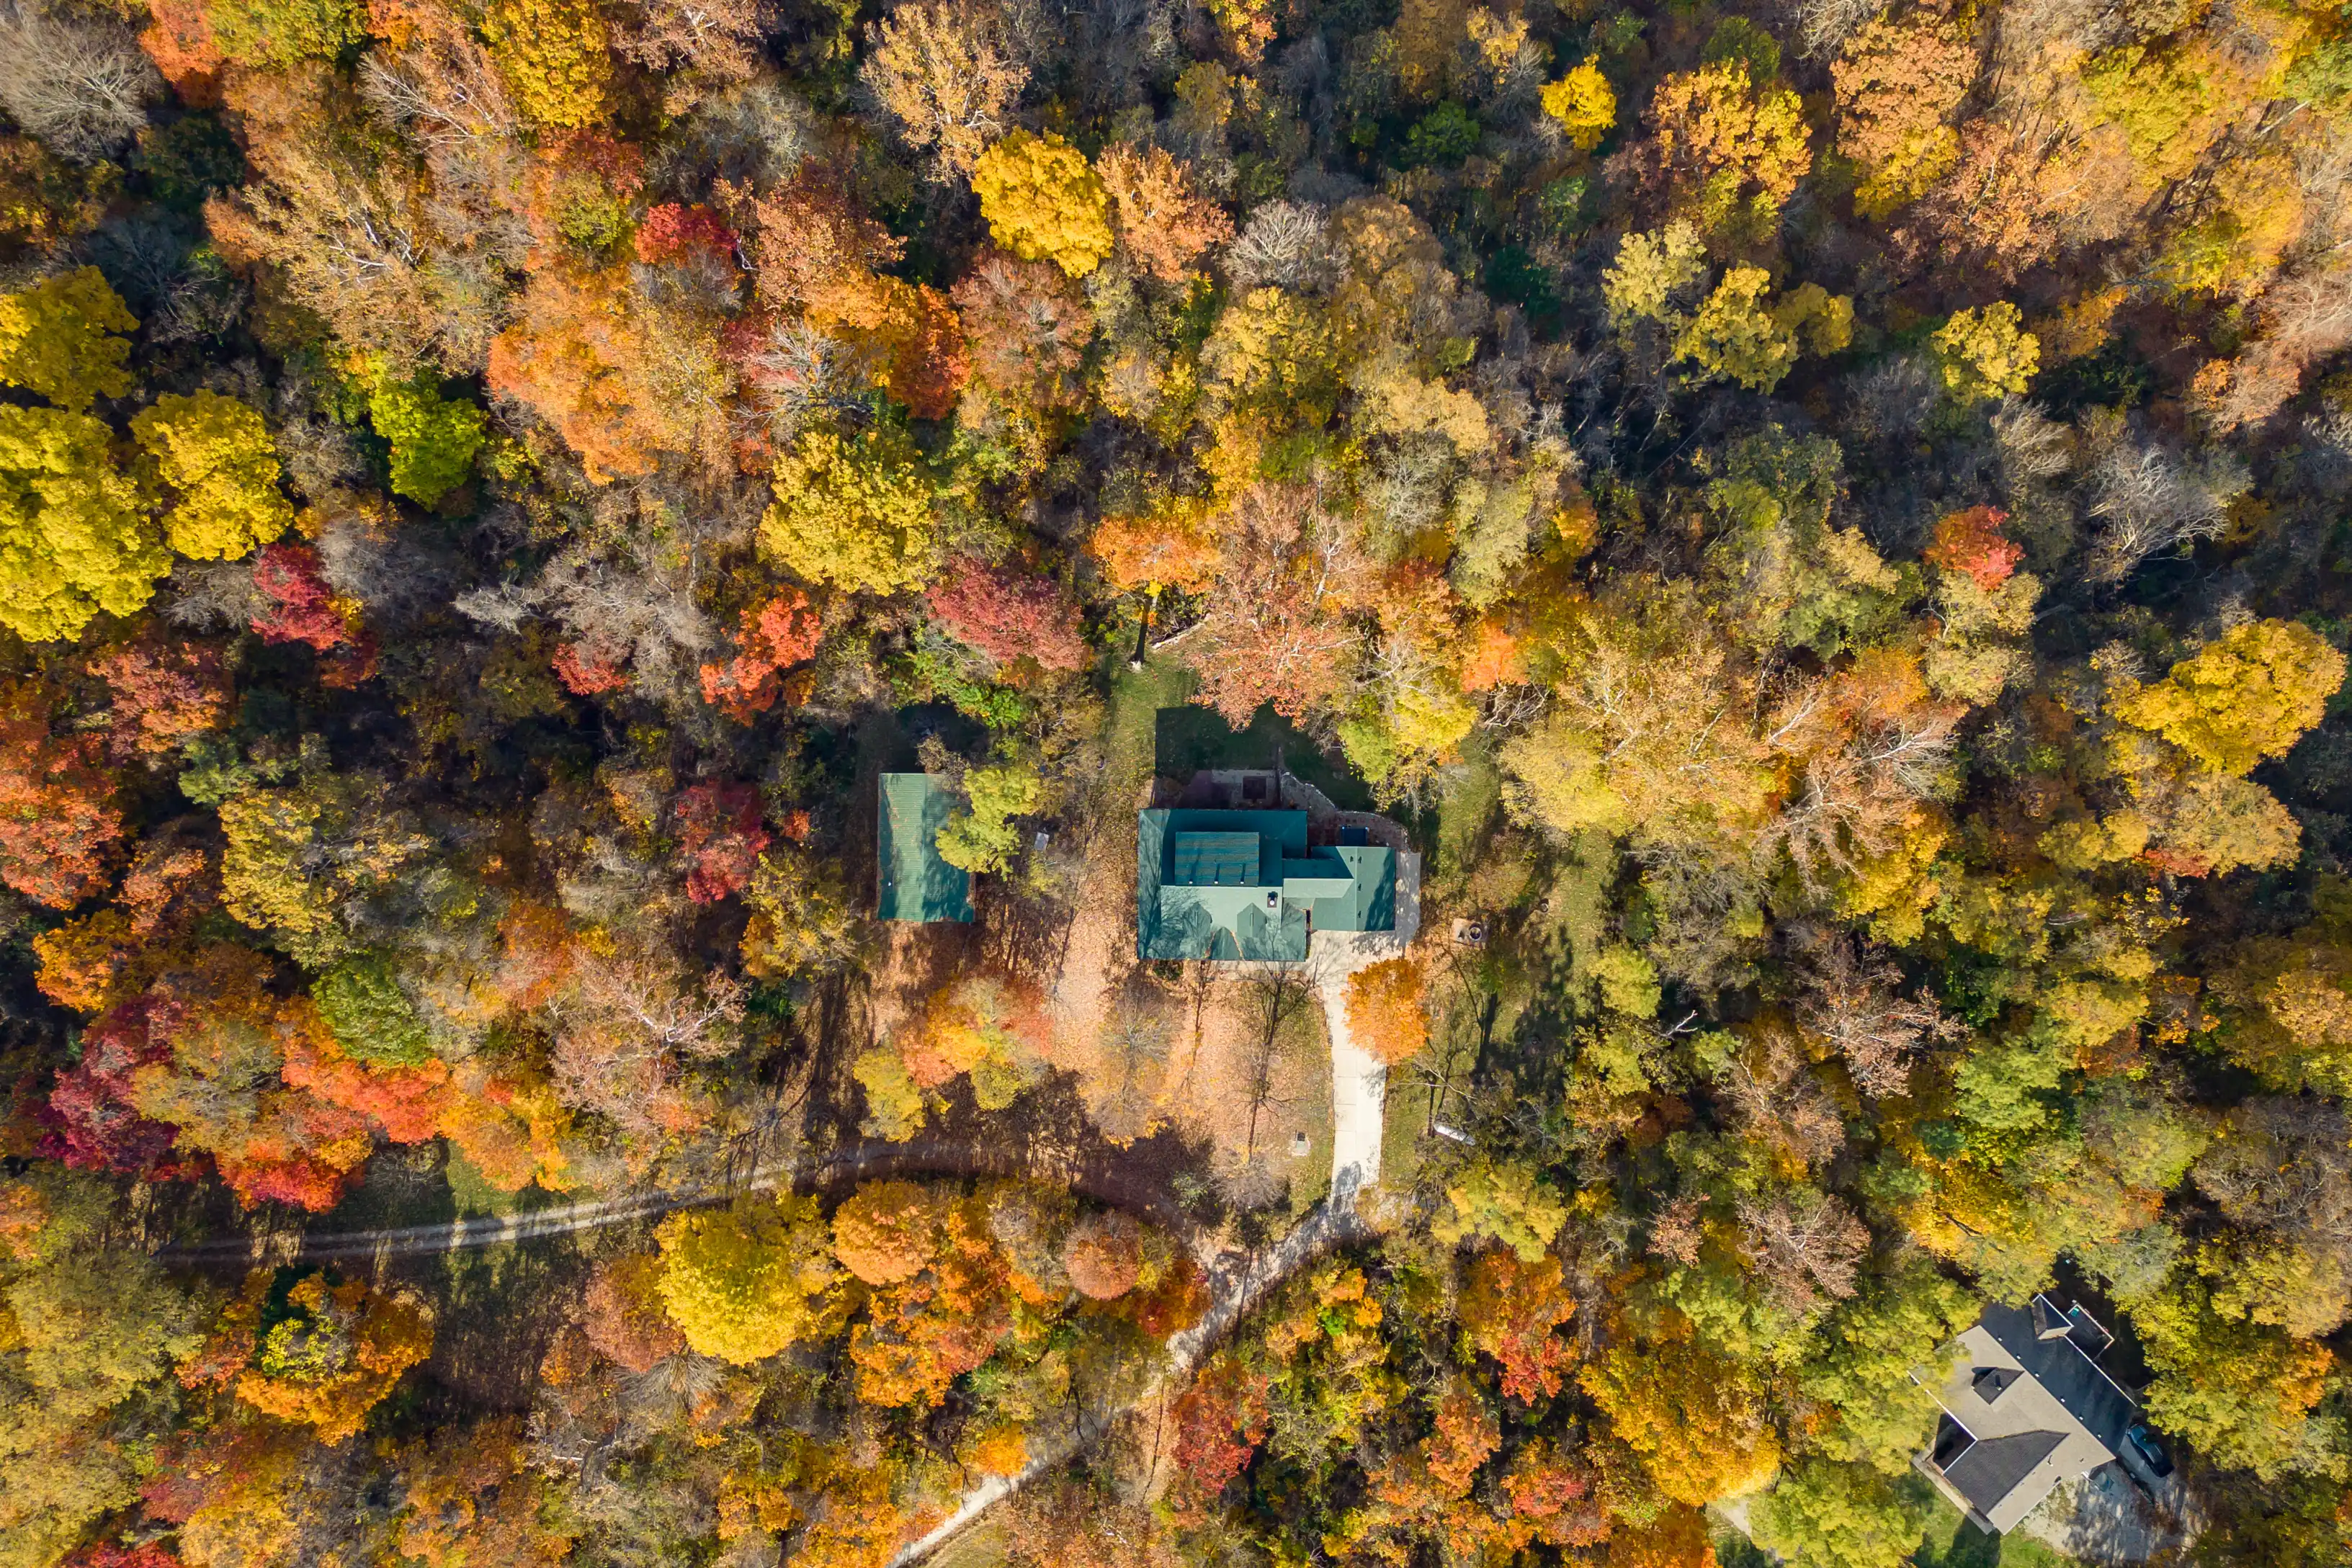 Aerial view of a lush forest in autumn with colorful foliage and a few houses nestled among the trees.